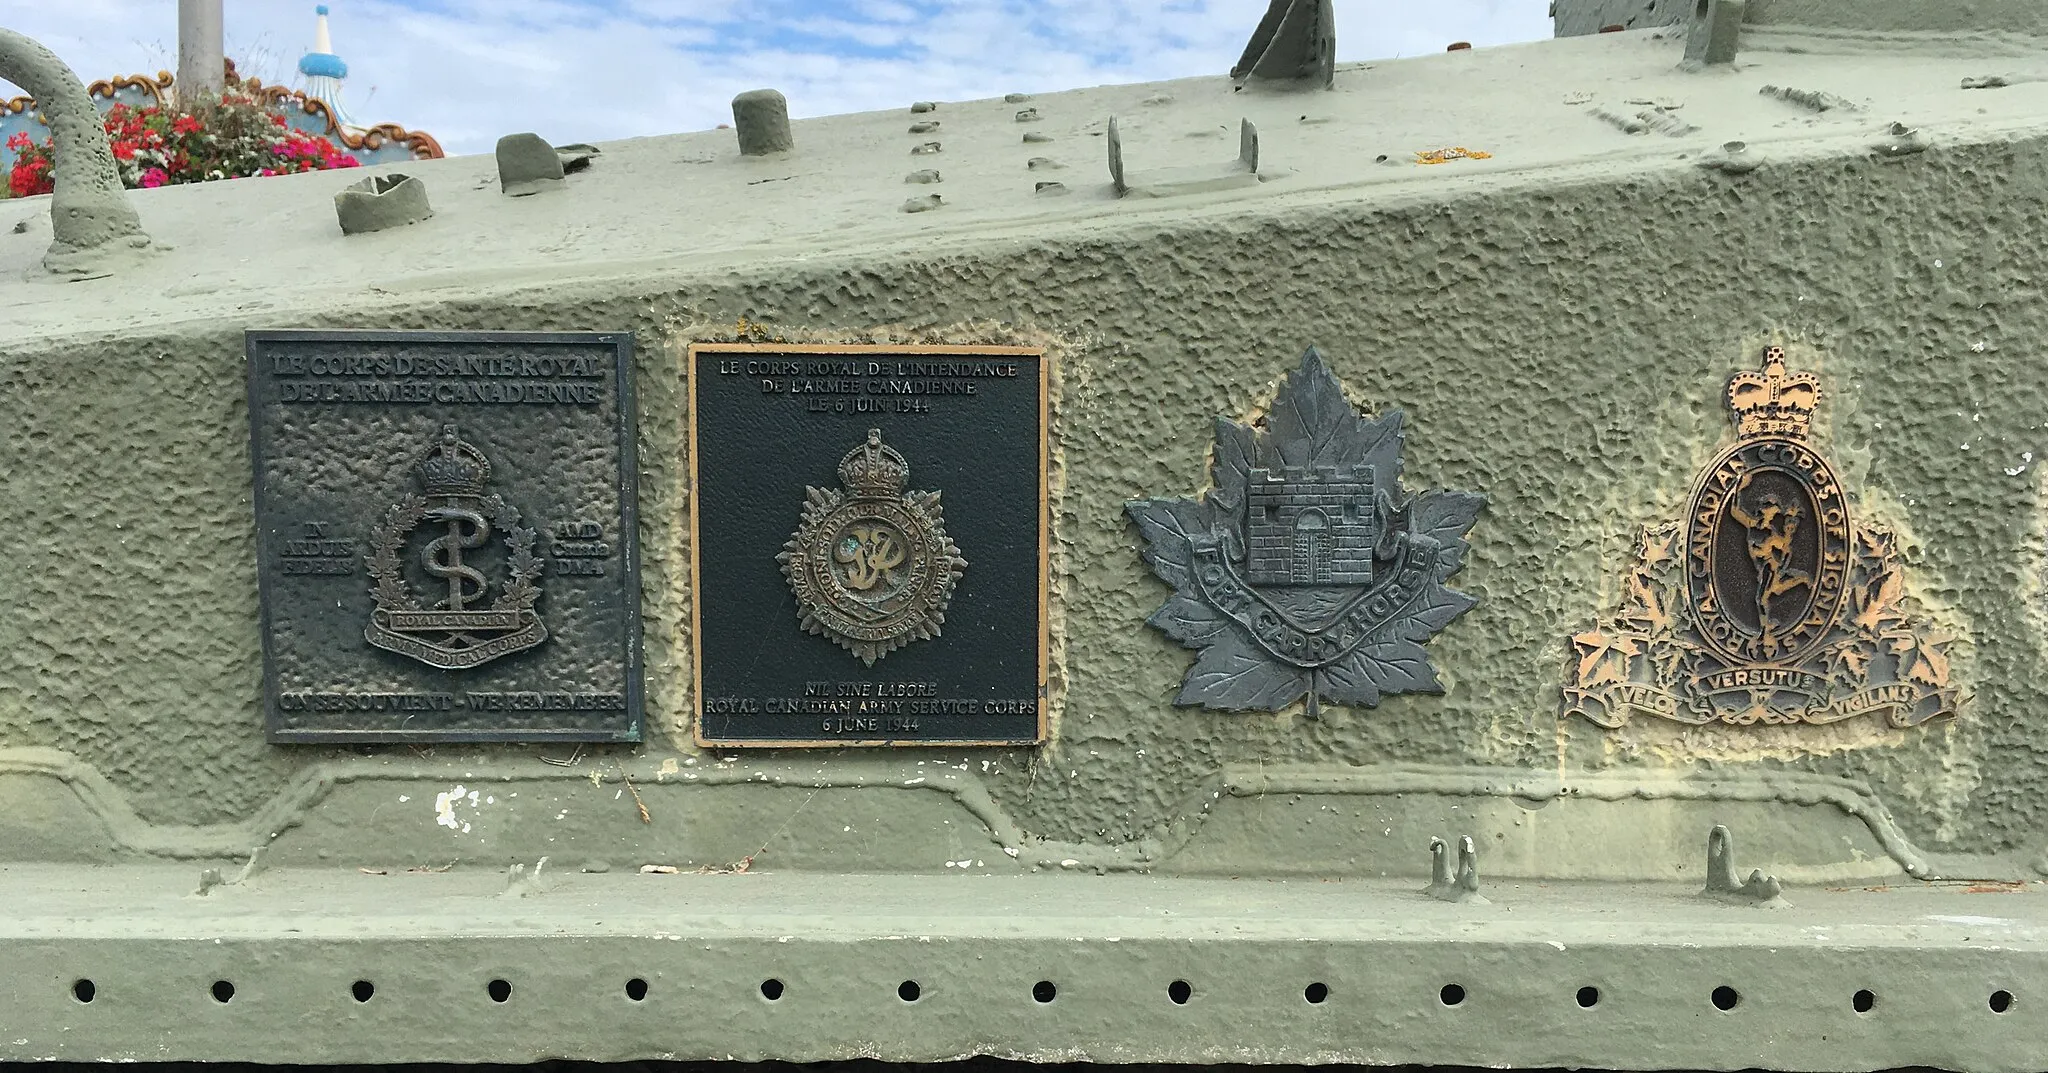 Photo showing: Coats of arms on the right side of the tank